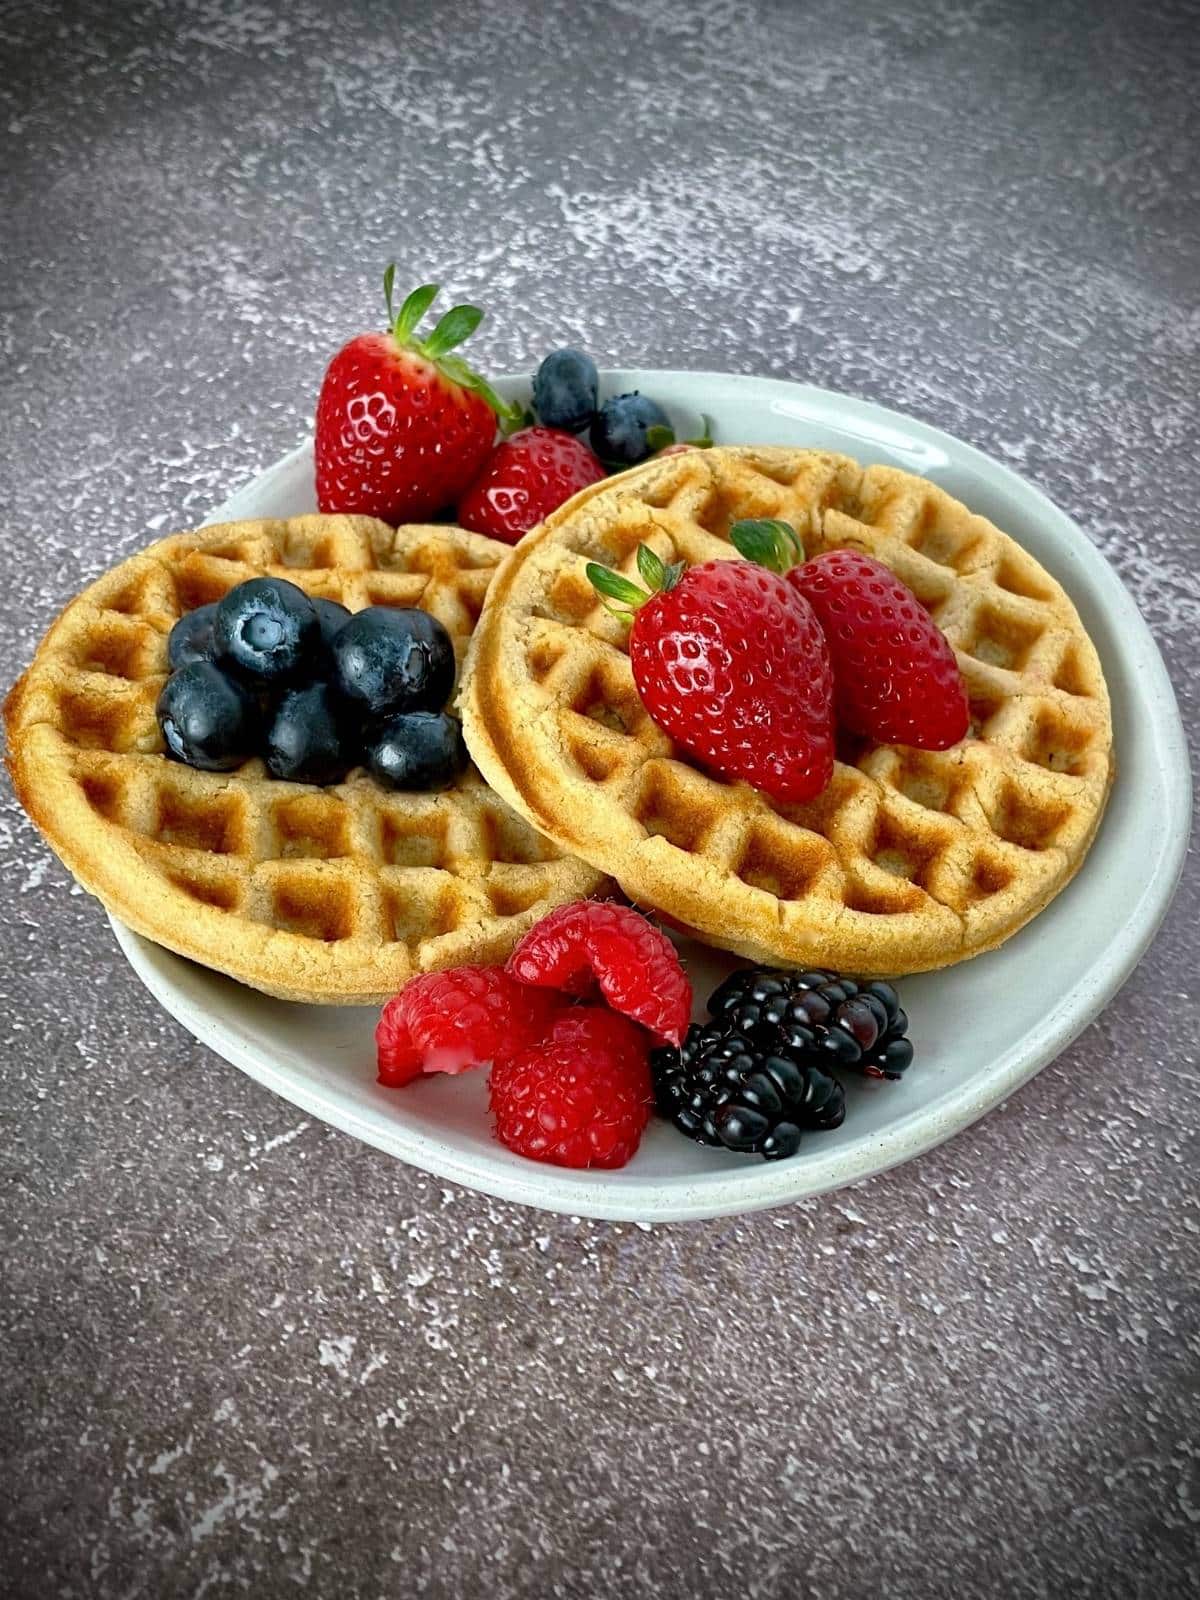 Cooked waffles on a plate with fresh fruit.